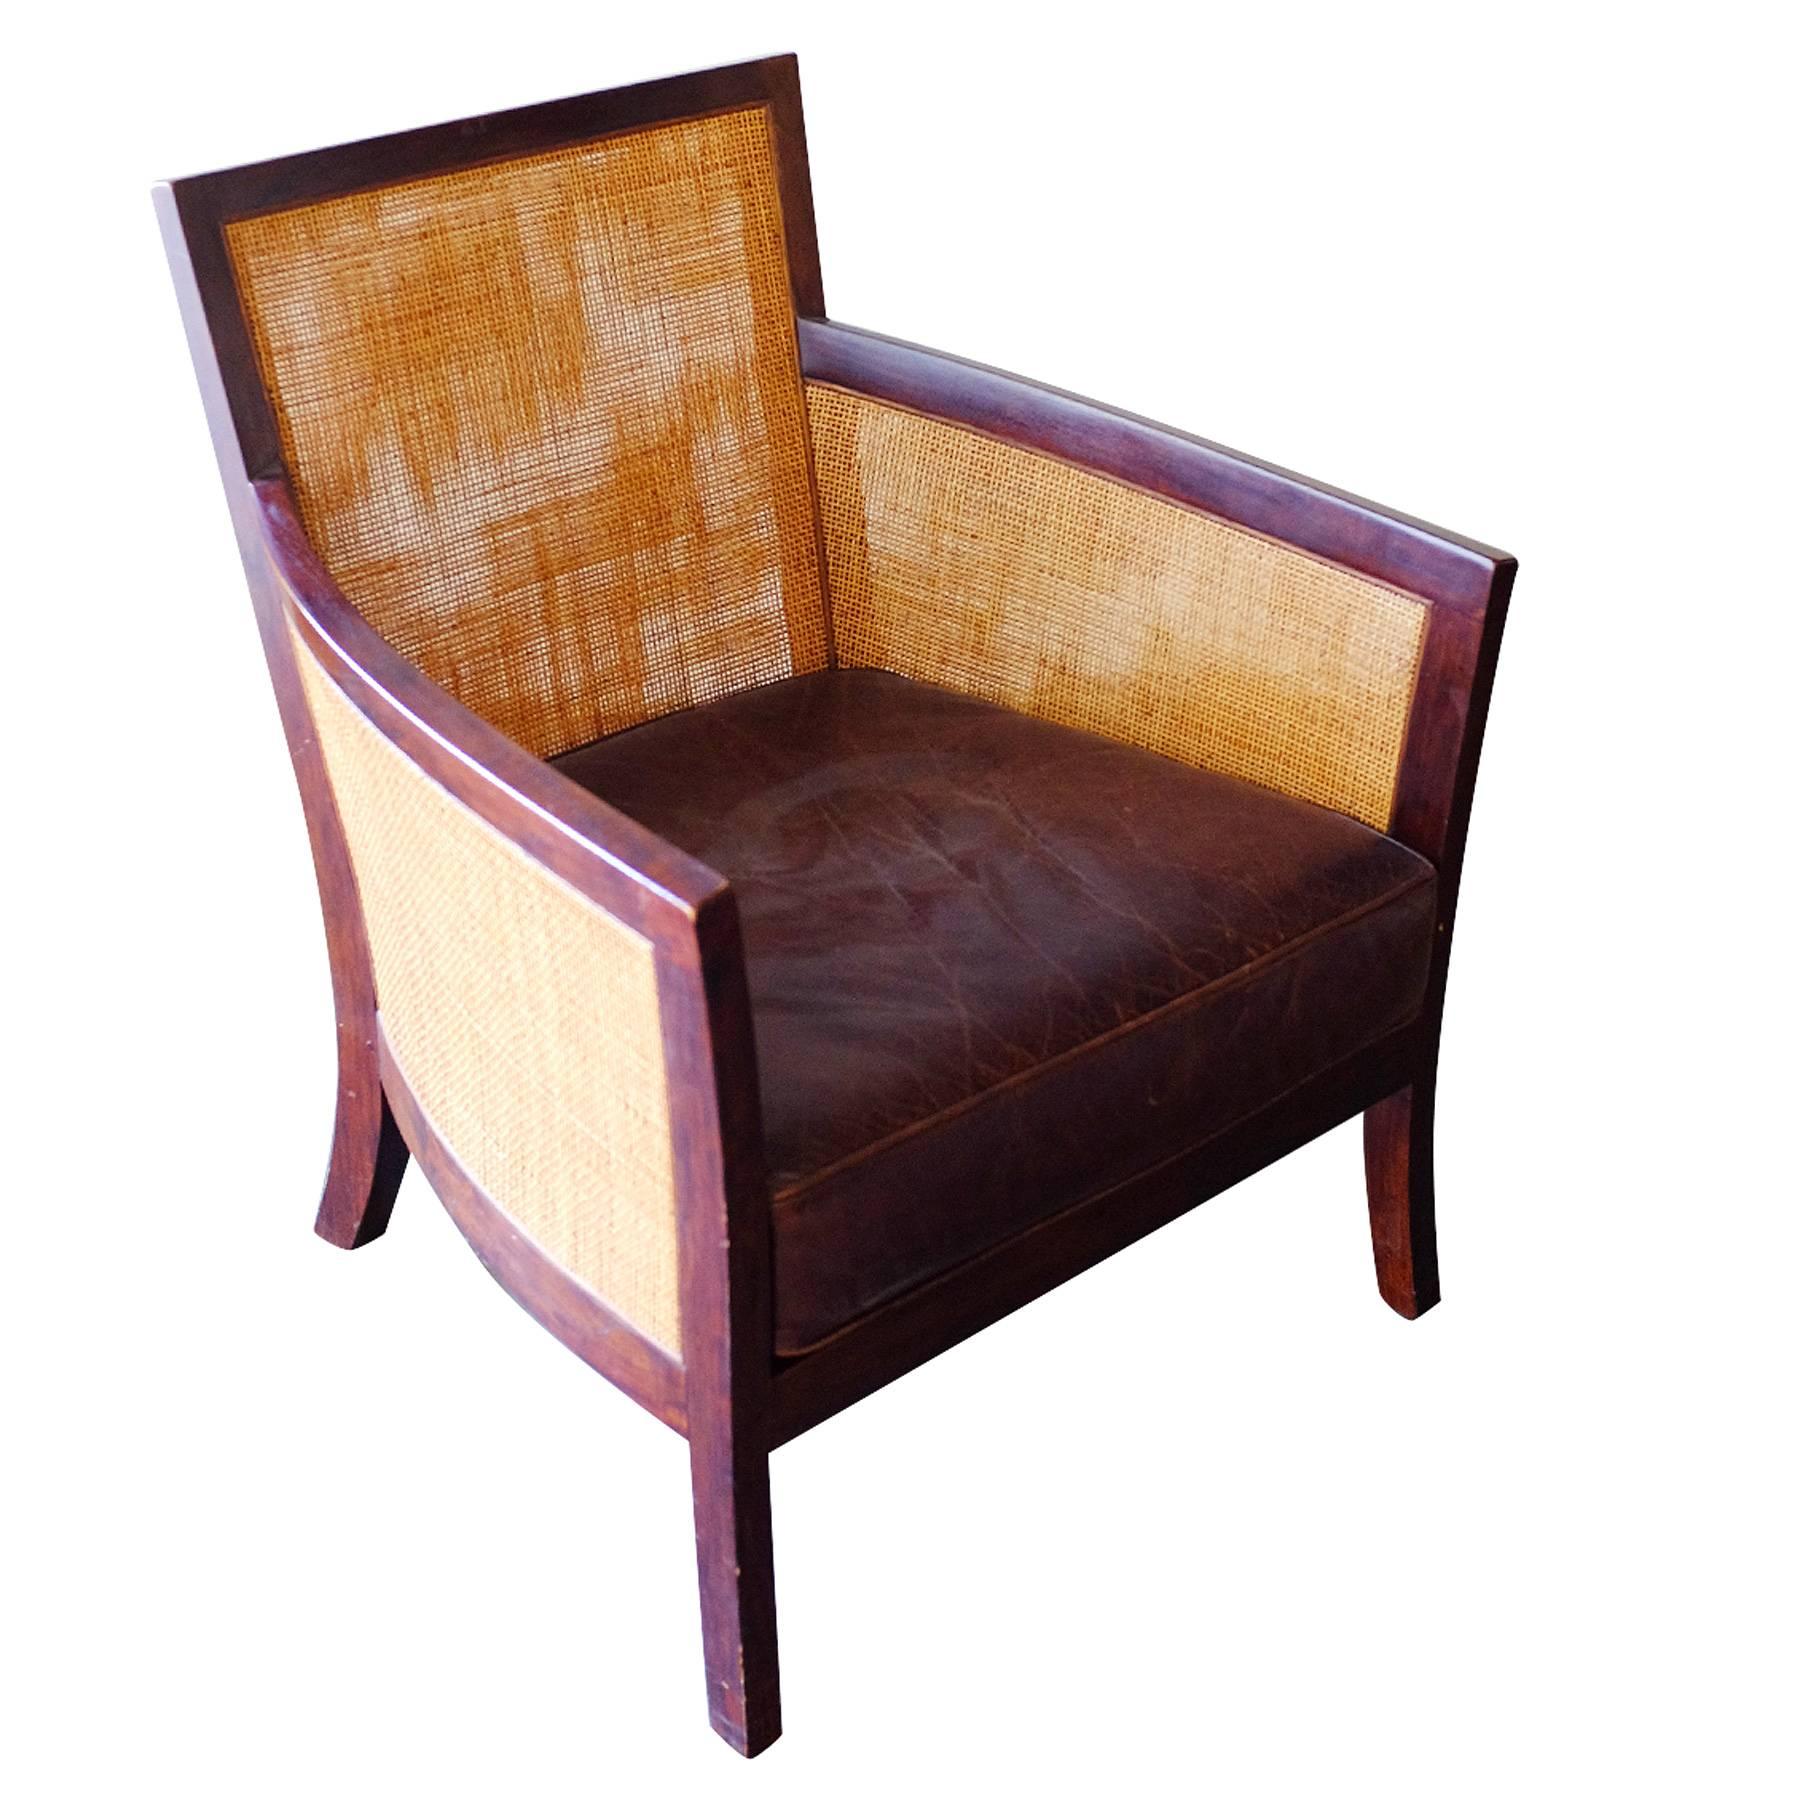 Modern Contemporary Dark Stained Wicker Lounge Chair